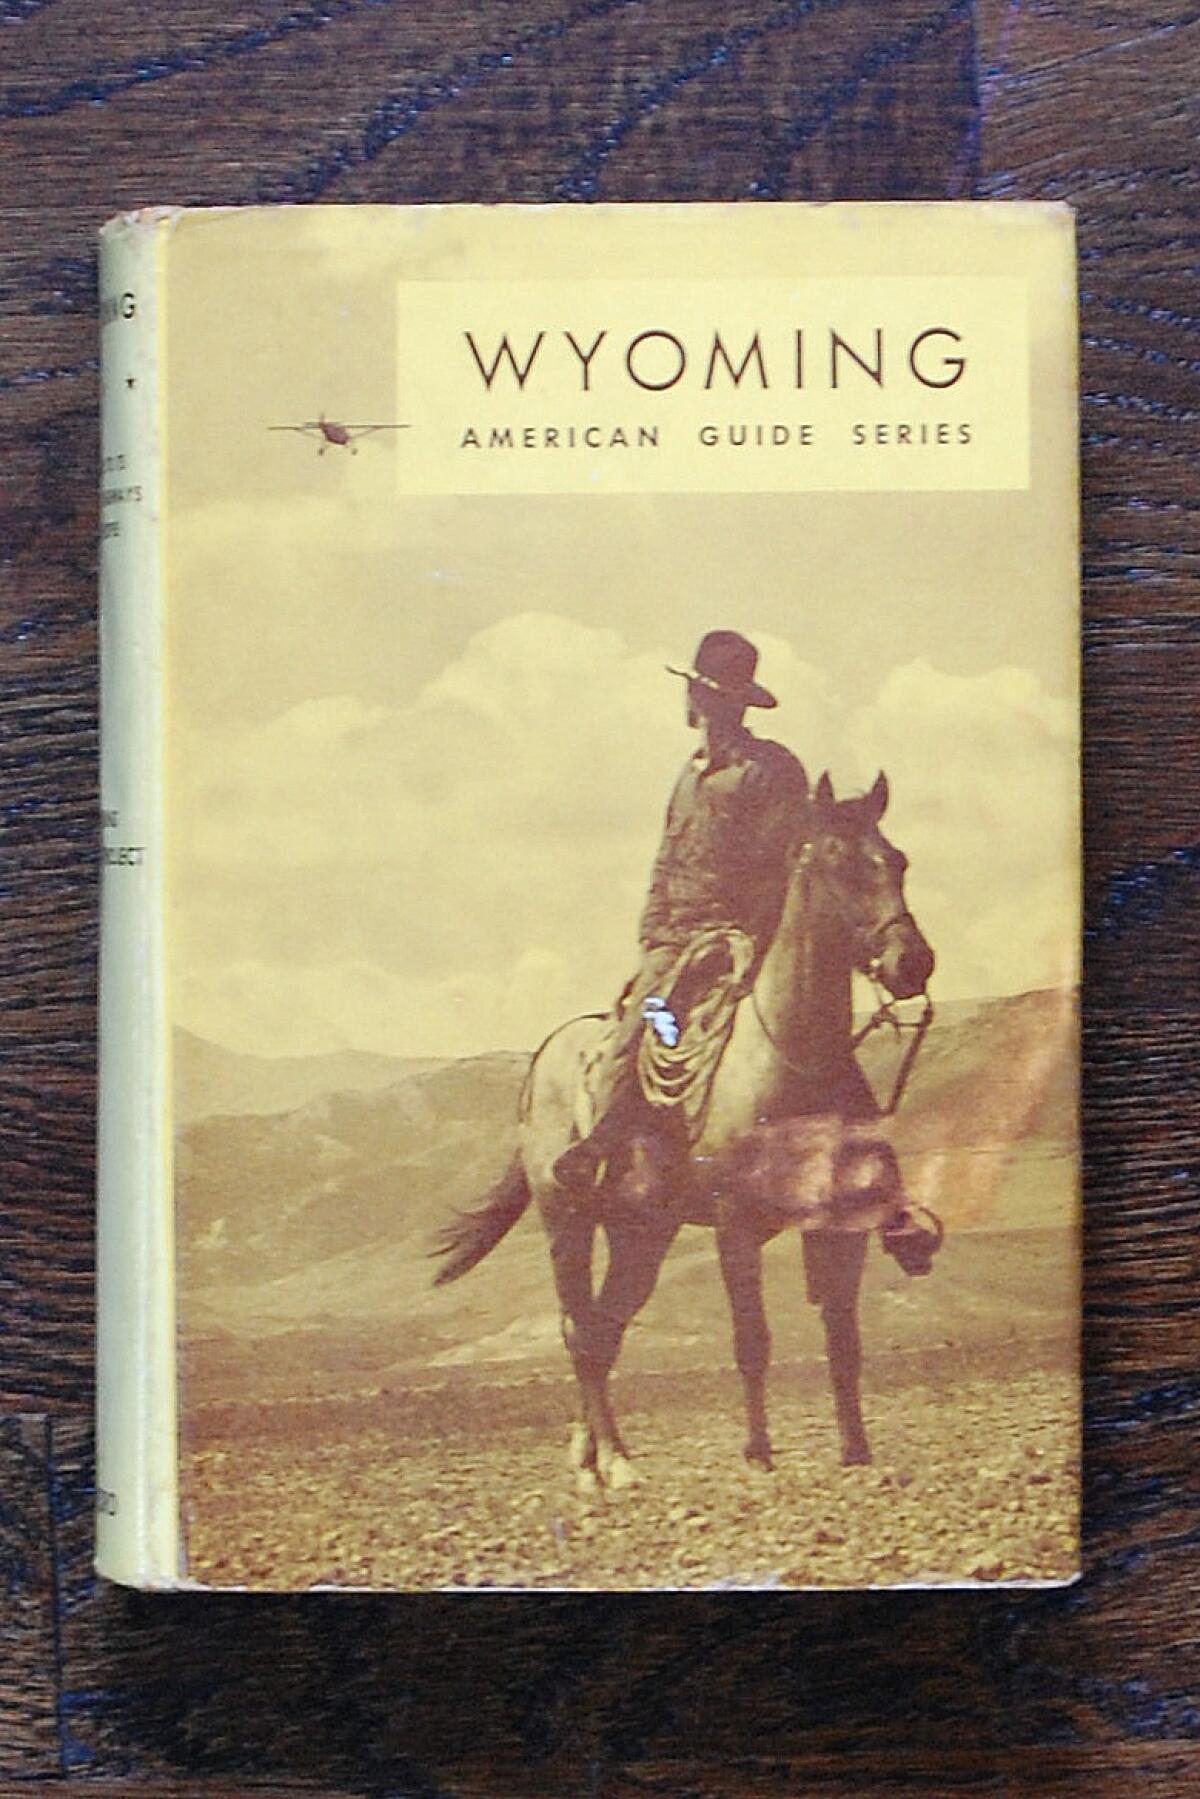 A man in a cowboy hat sits atop a horse with a plane above in a photo on a book cover.